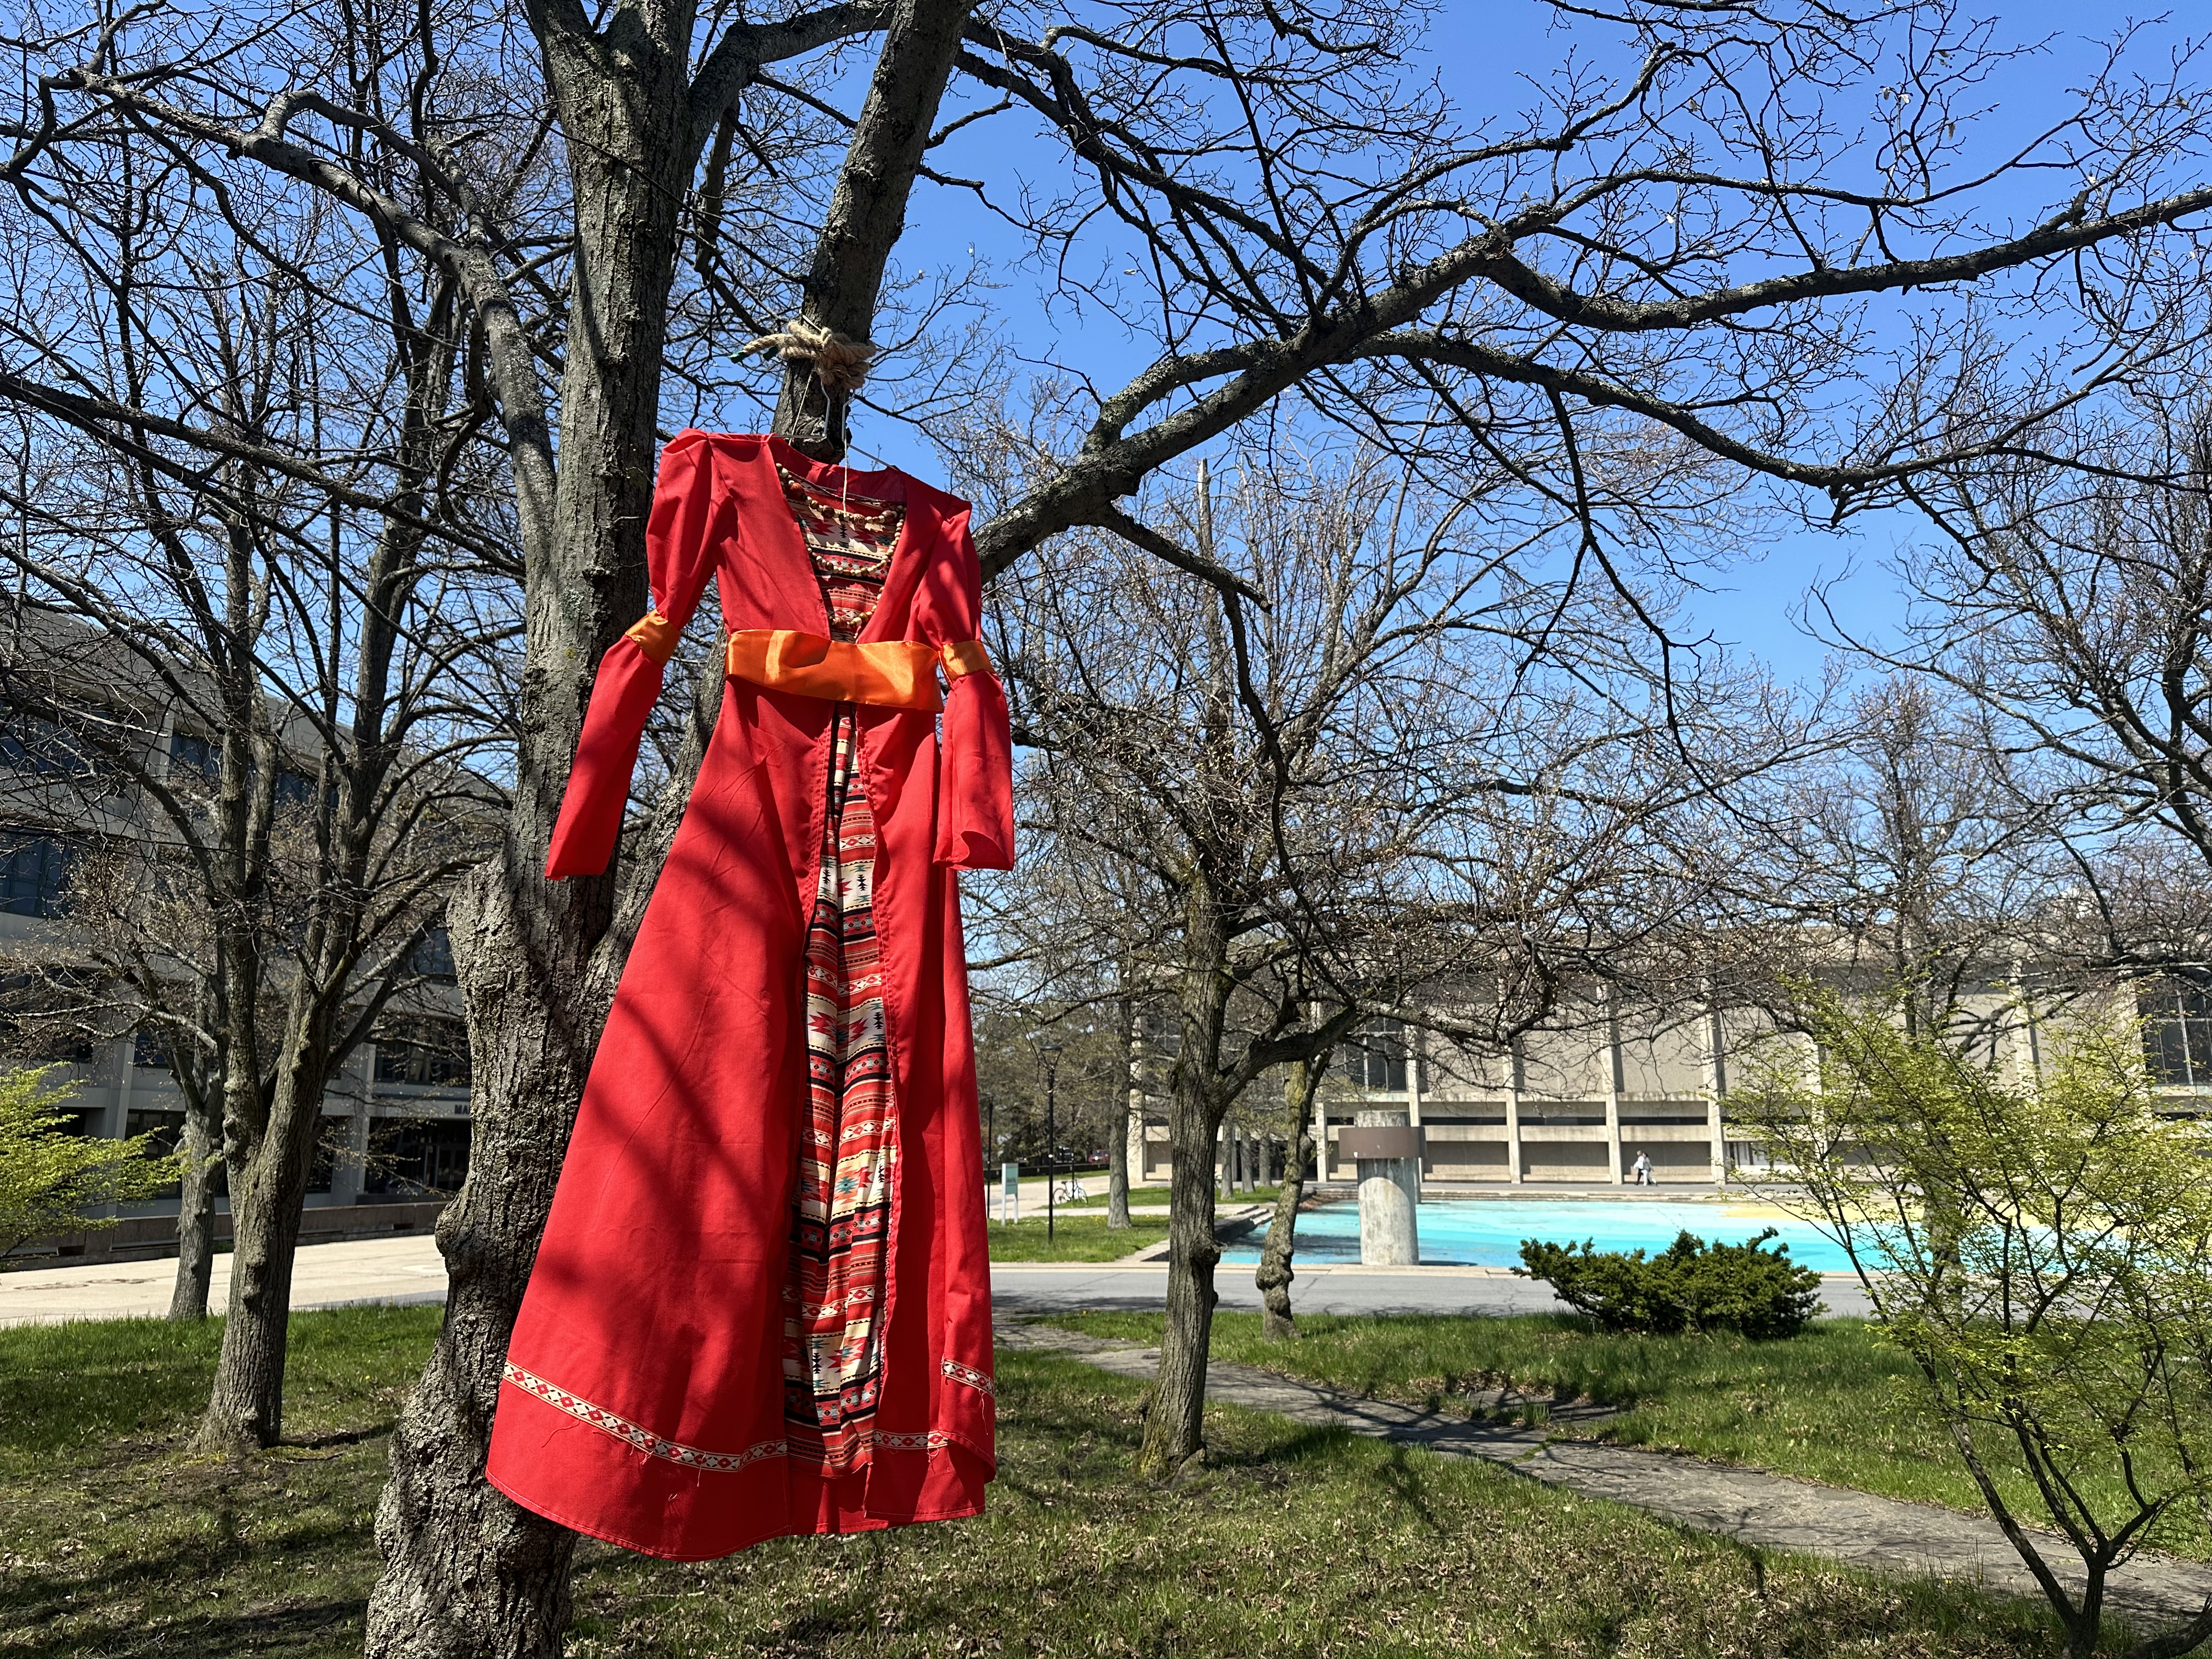 The Red Dress Art Installation Project returned to campus to raise awareness of Missing and Murdered Indigenous Women (#MMIW). Red dresses made by students are displayed on campus (on the sundial of the academic quad) from April 19 to May 3.